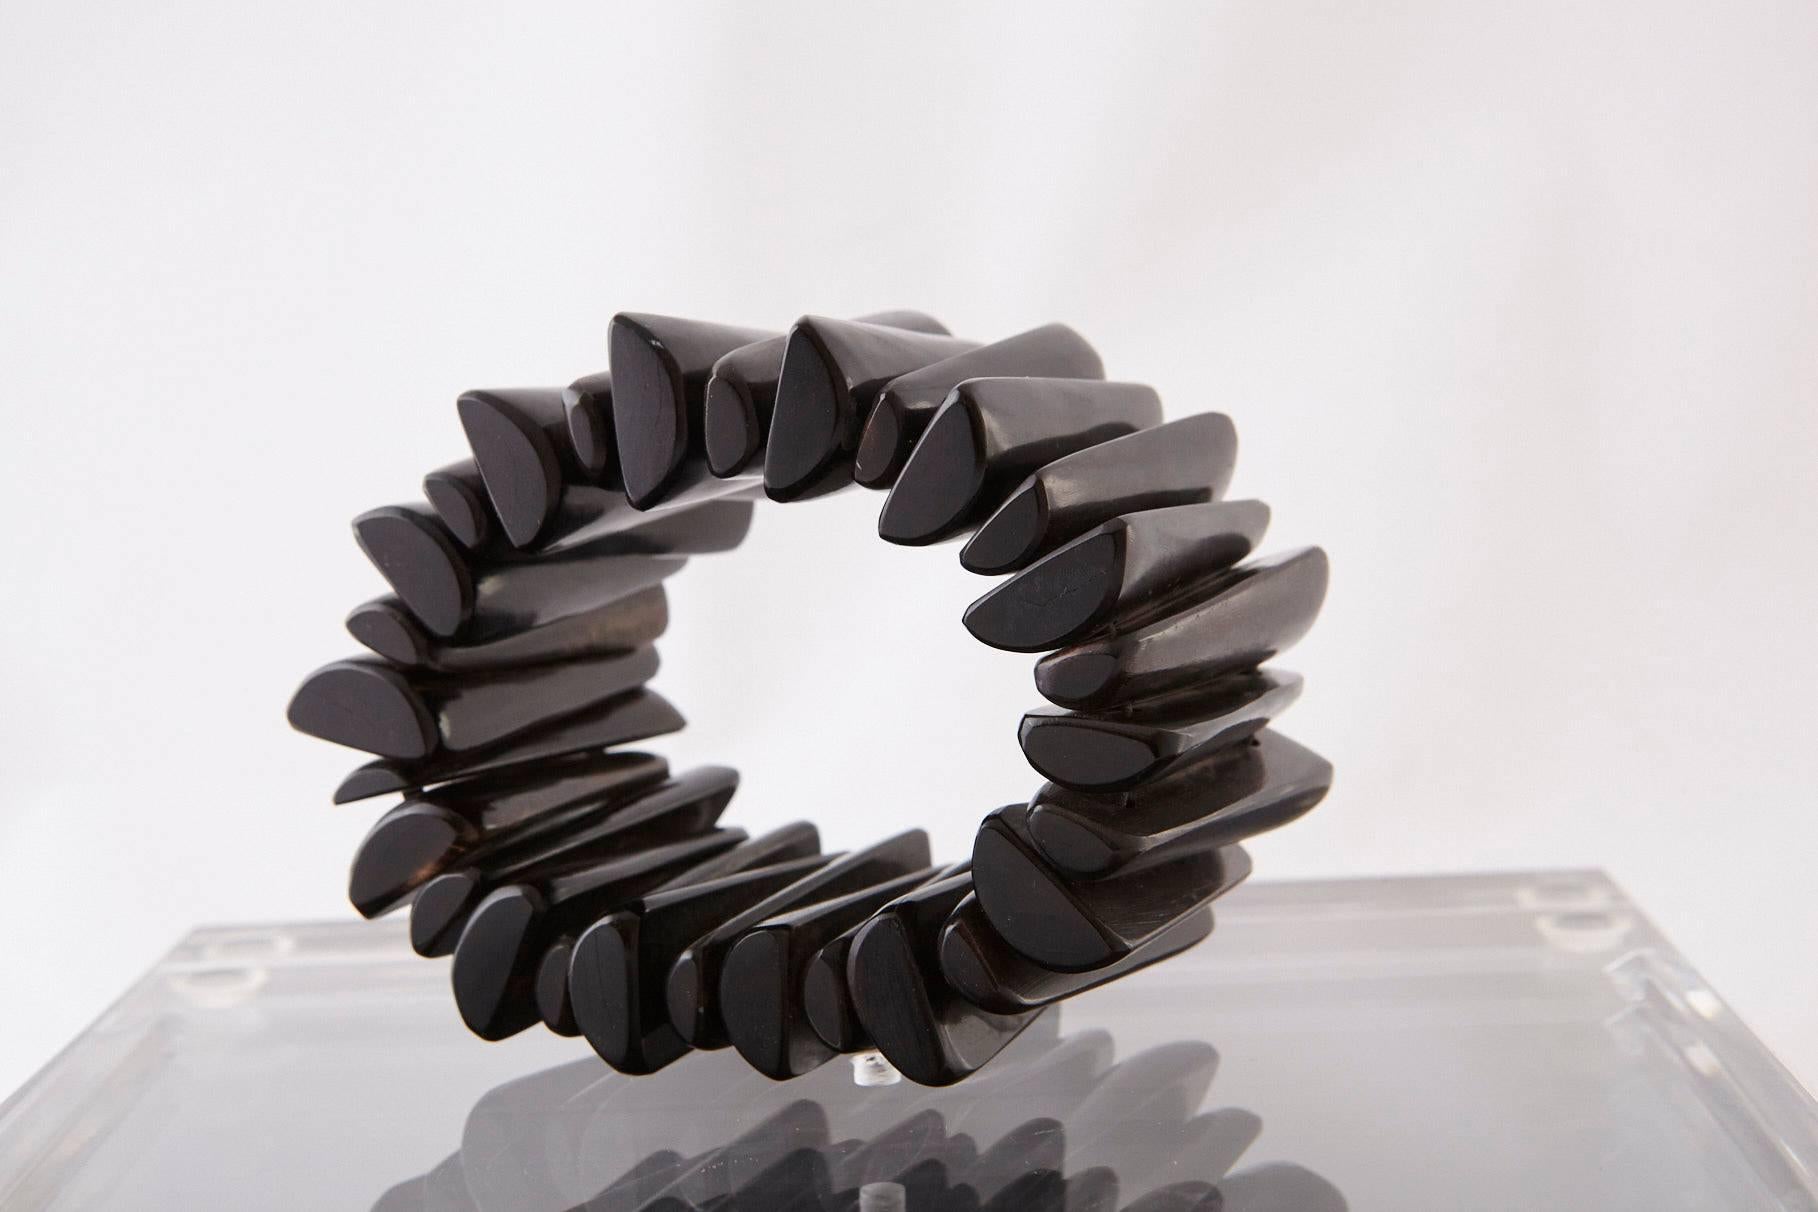 Stunning large modern hand-carved ebony bracelet made from 28 single pieces of ebony.

Measure: Opening 2.25 inches.